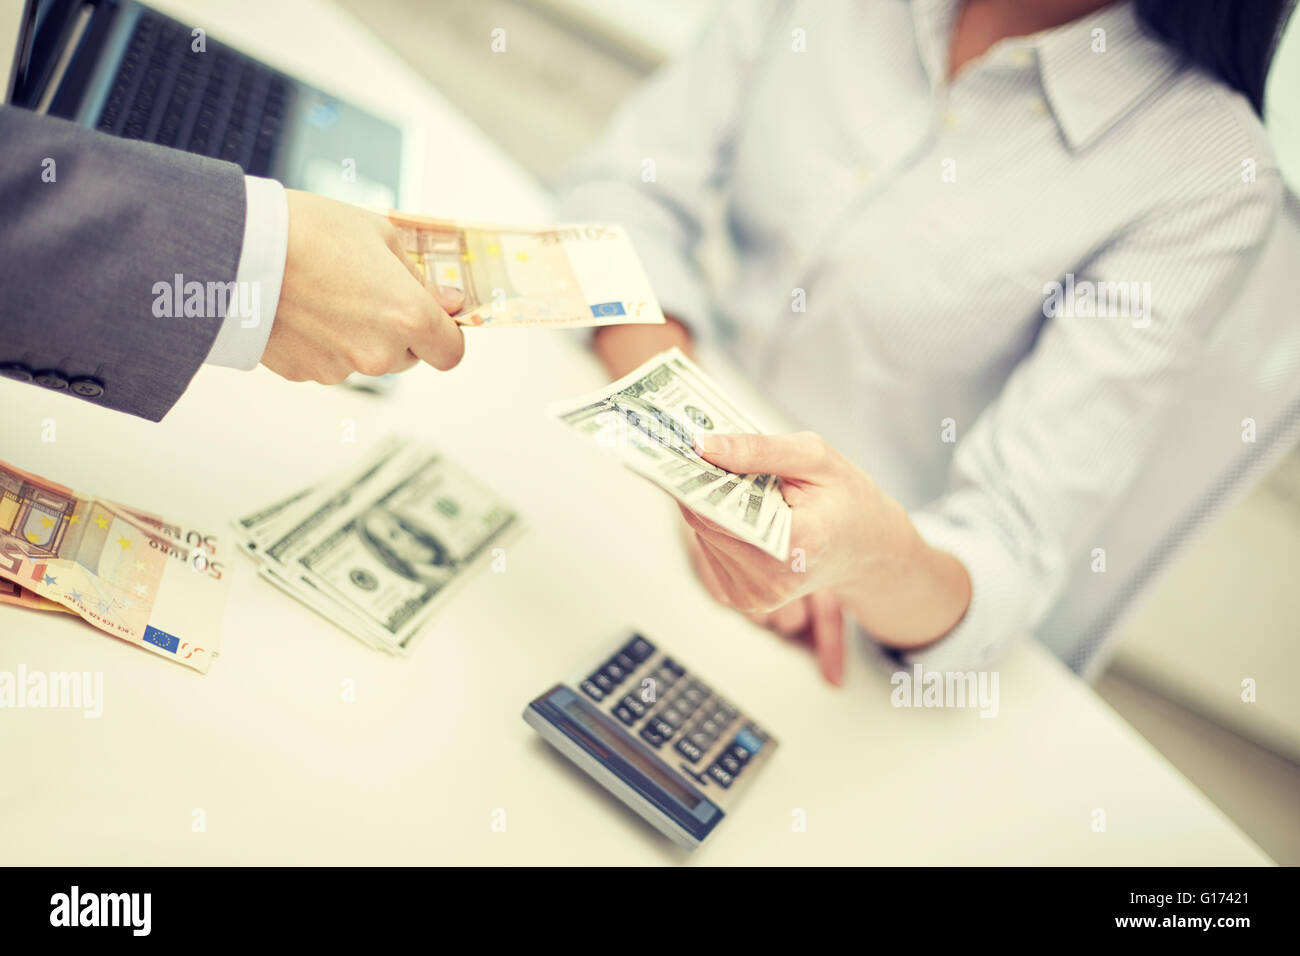 close up of hands giving or exchanging money Stock Photo